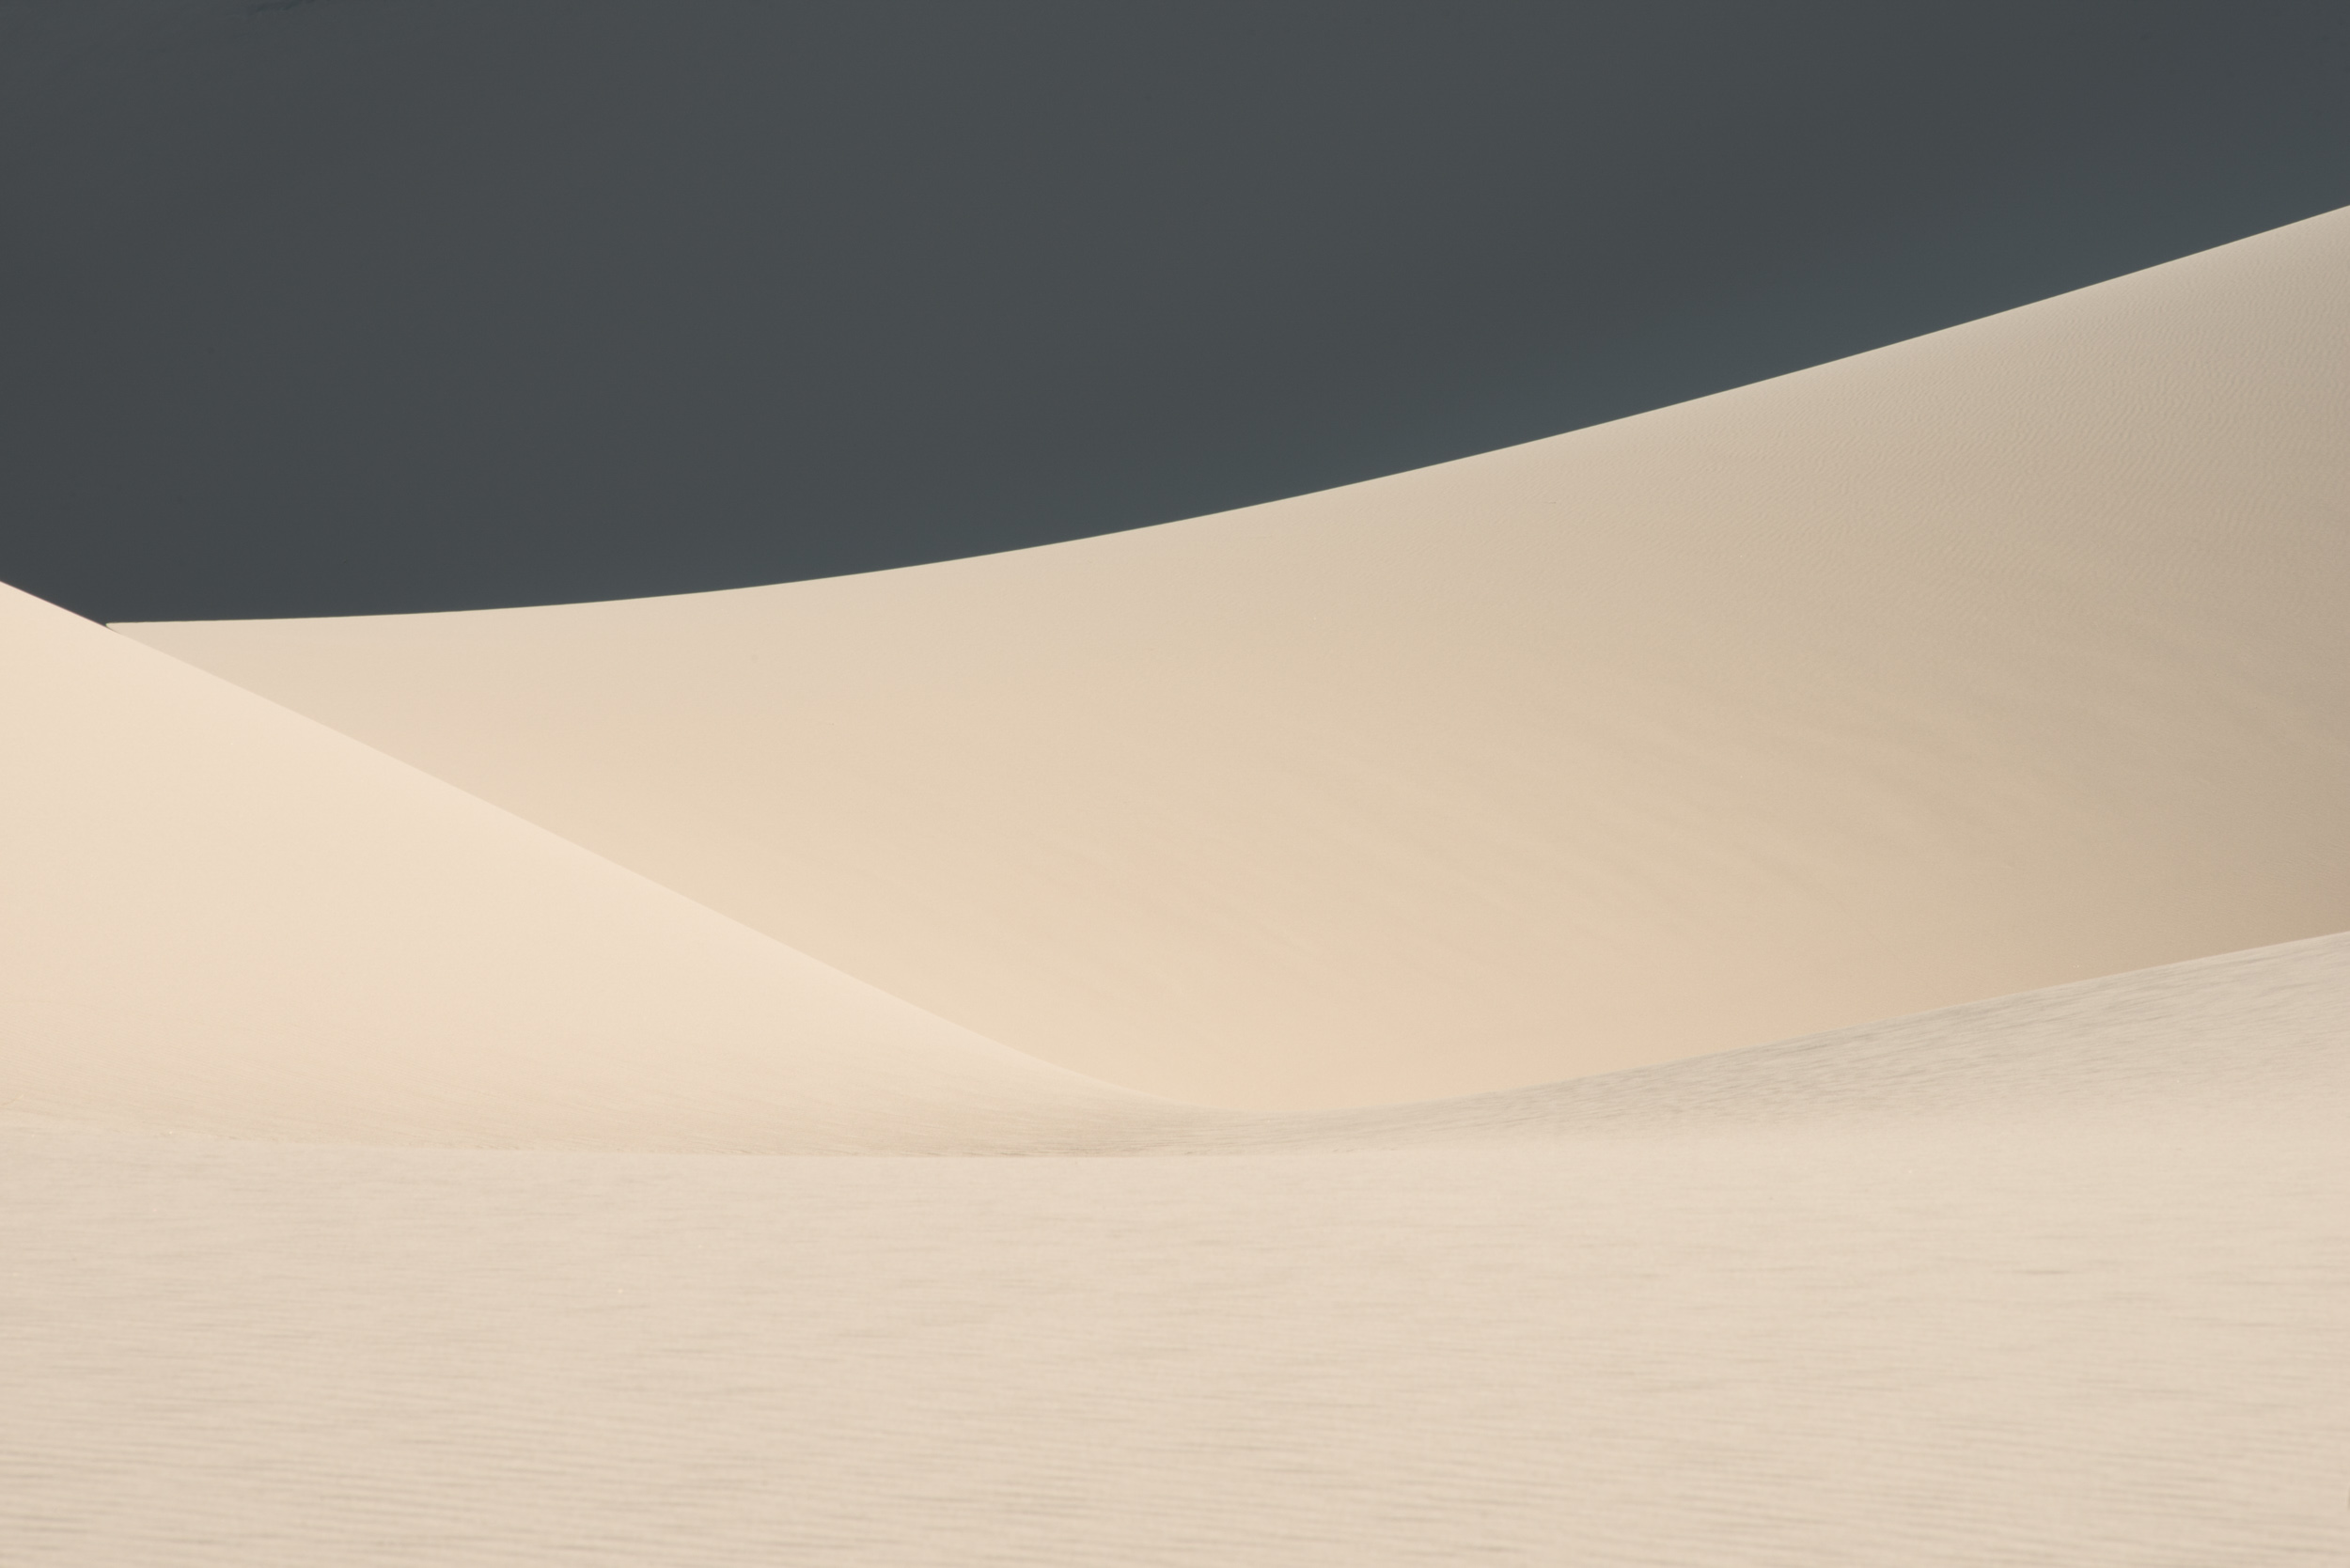 Abstract series on light, shadow and lines on the Eureka Dunes in Death Valley National Park.